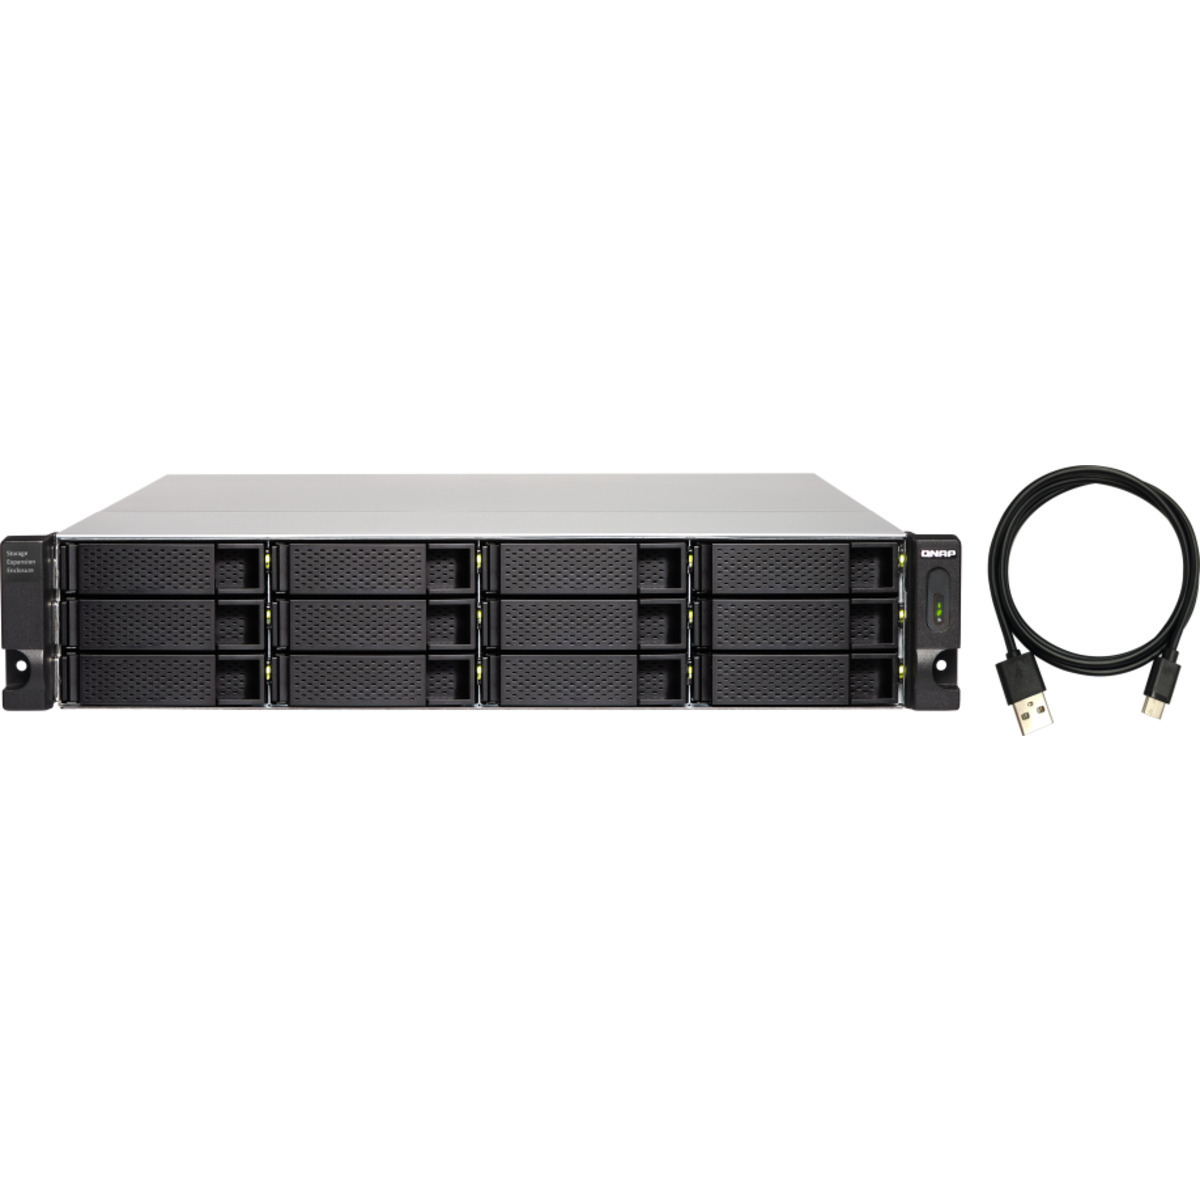 buy $2849 QNAP TL-R1200C-RP External Expansion Drive 24tb RackMount Expansion Enclosure 12x2000gb Seagate IronWolf Pro ST2000NT001 3.5 7200rpm SATA 6Gb/s HDD NAS Class Drives Installed - Burn-In Tested - nas headquarters buy network attached storage server device das new raid-5 free shipping simply usa TL-R1200C-RP External Expansion Drive